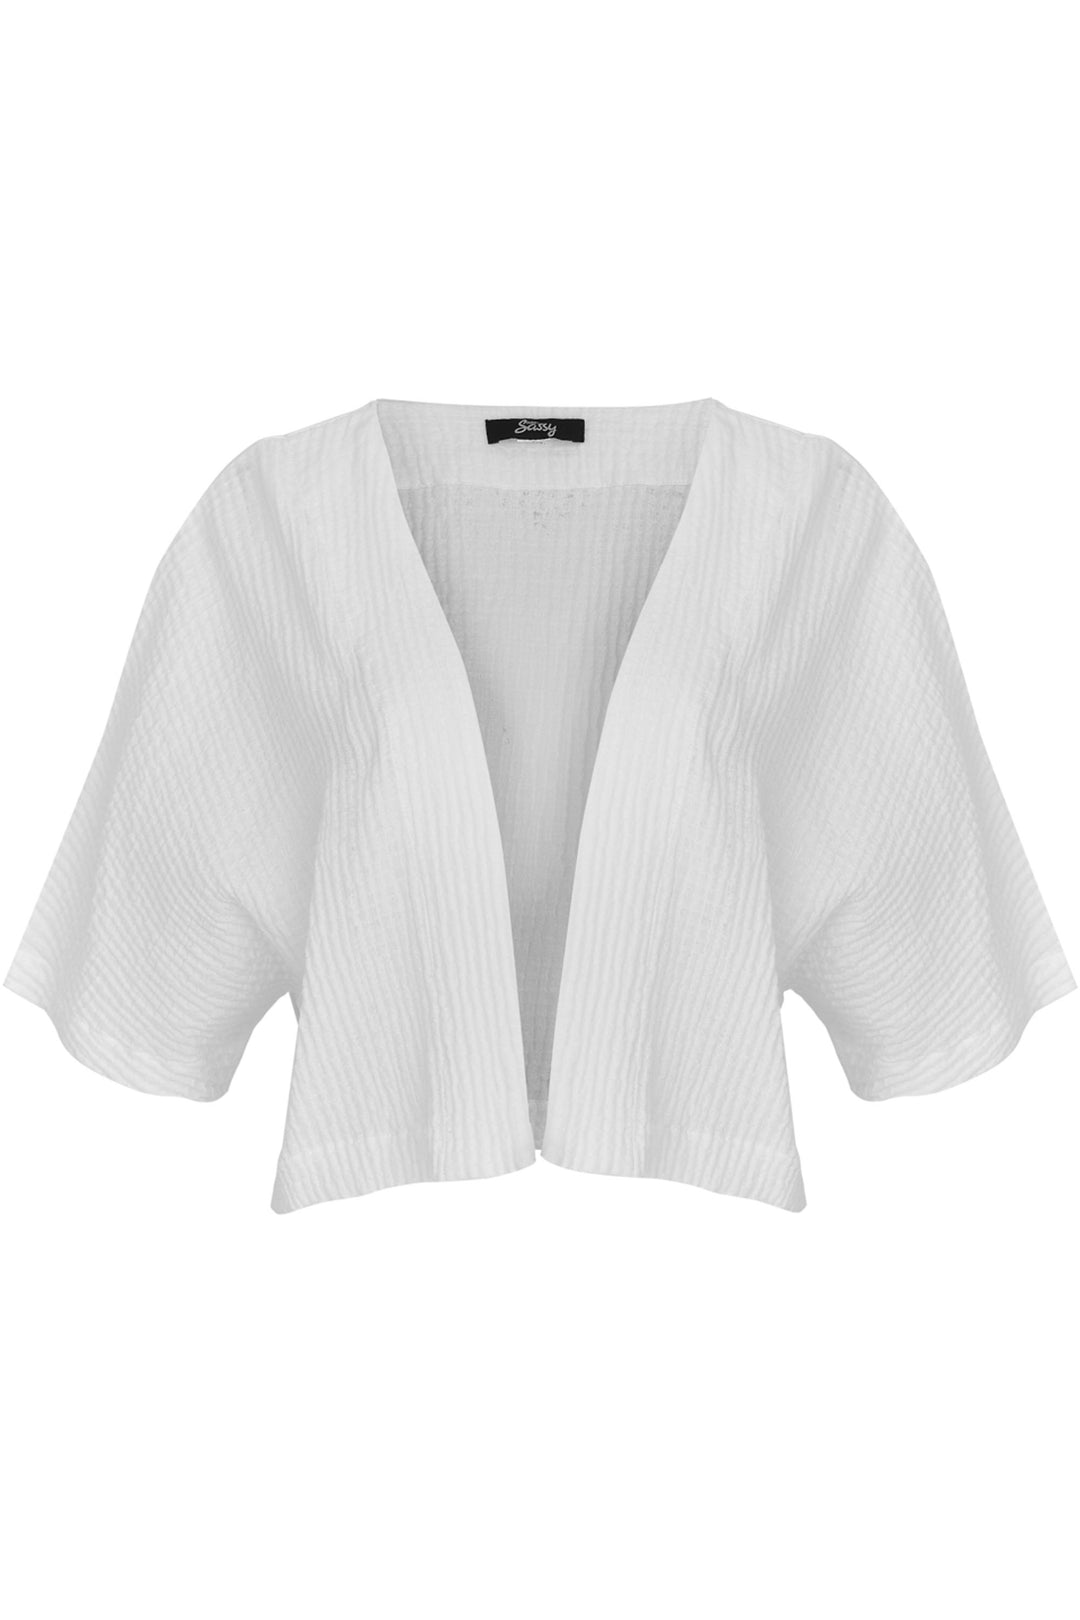 Ever Sassy Summer 2024 This Cotton Field White Cardigan is perfect for layering with its boxy cut and looser fit, providing comfort and versatility. 